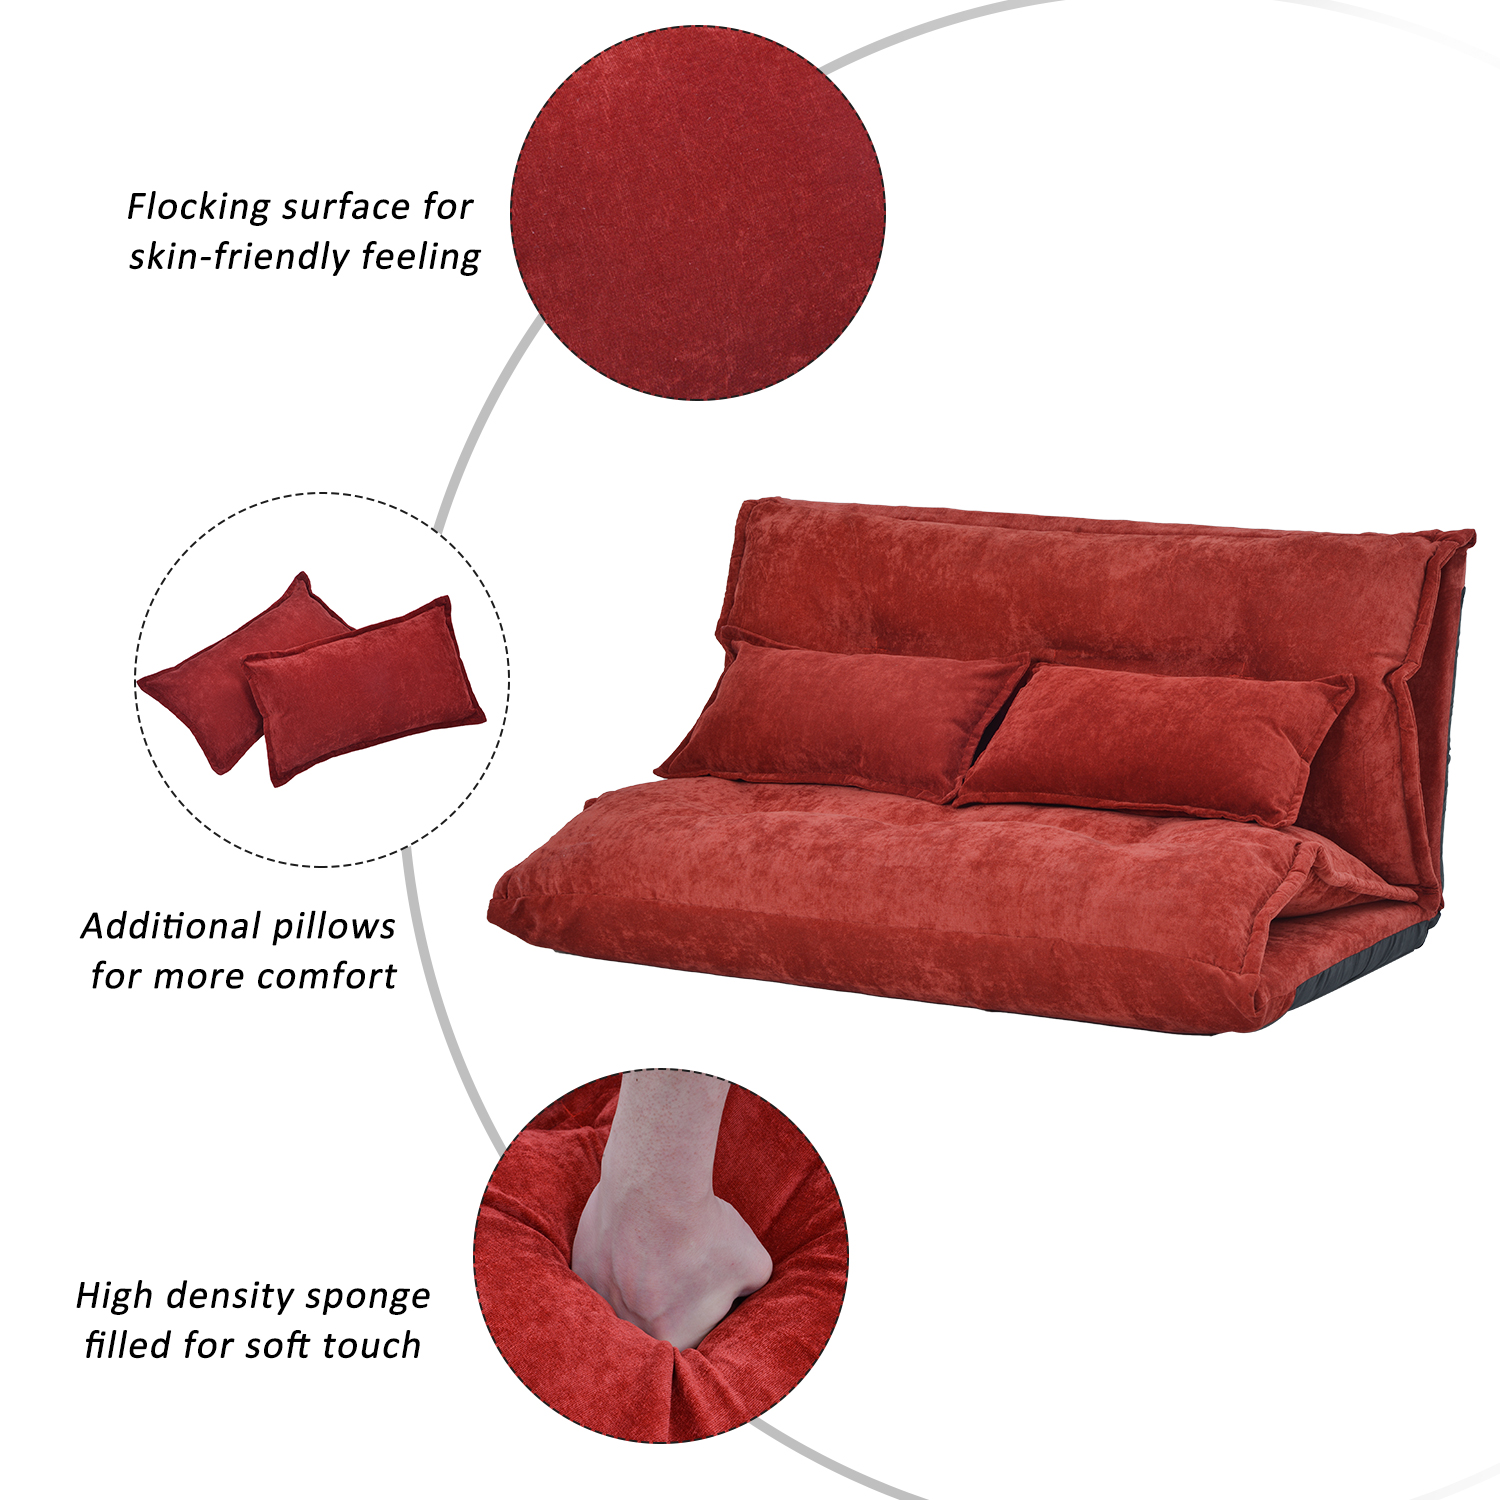 Leisure Sofa Bed With Two Pillows - WF194102AAD